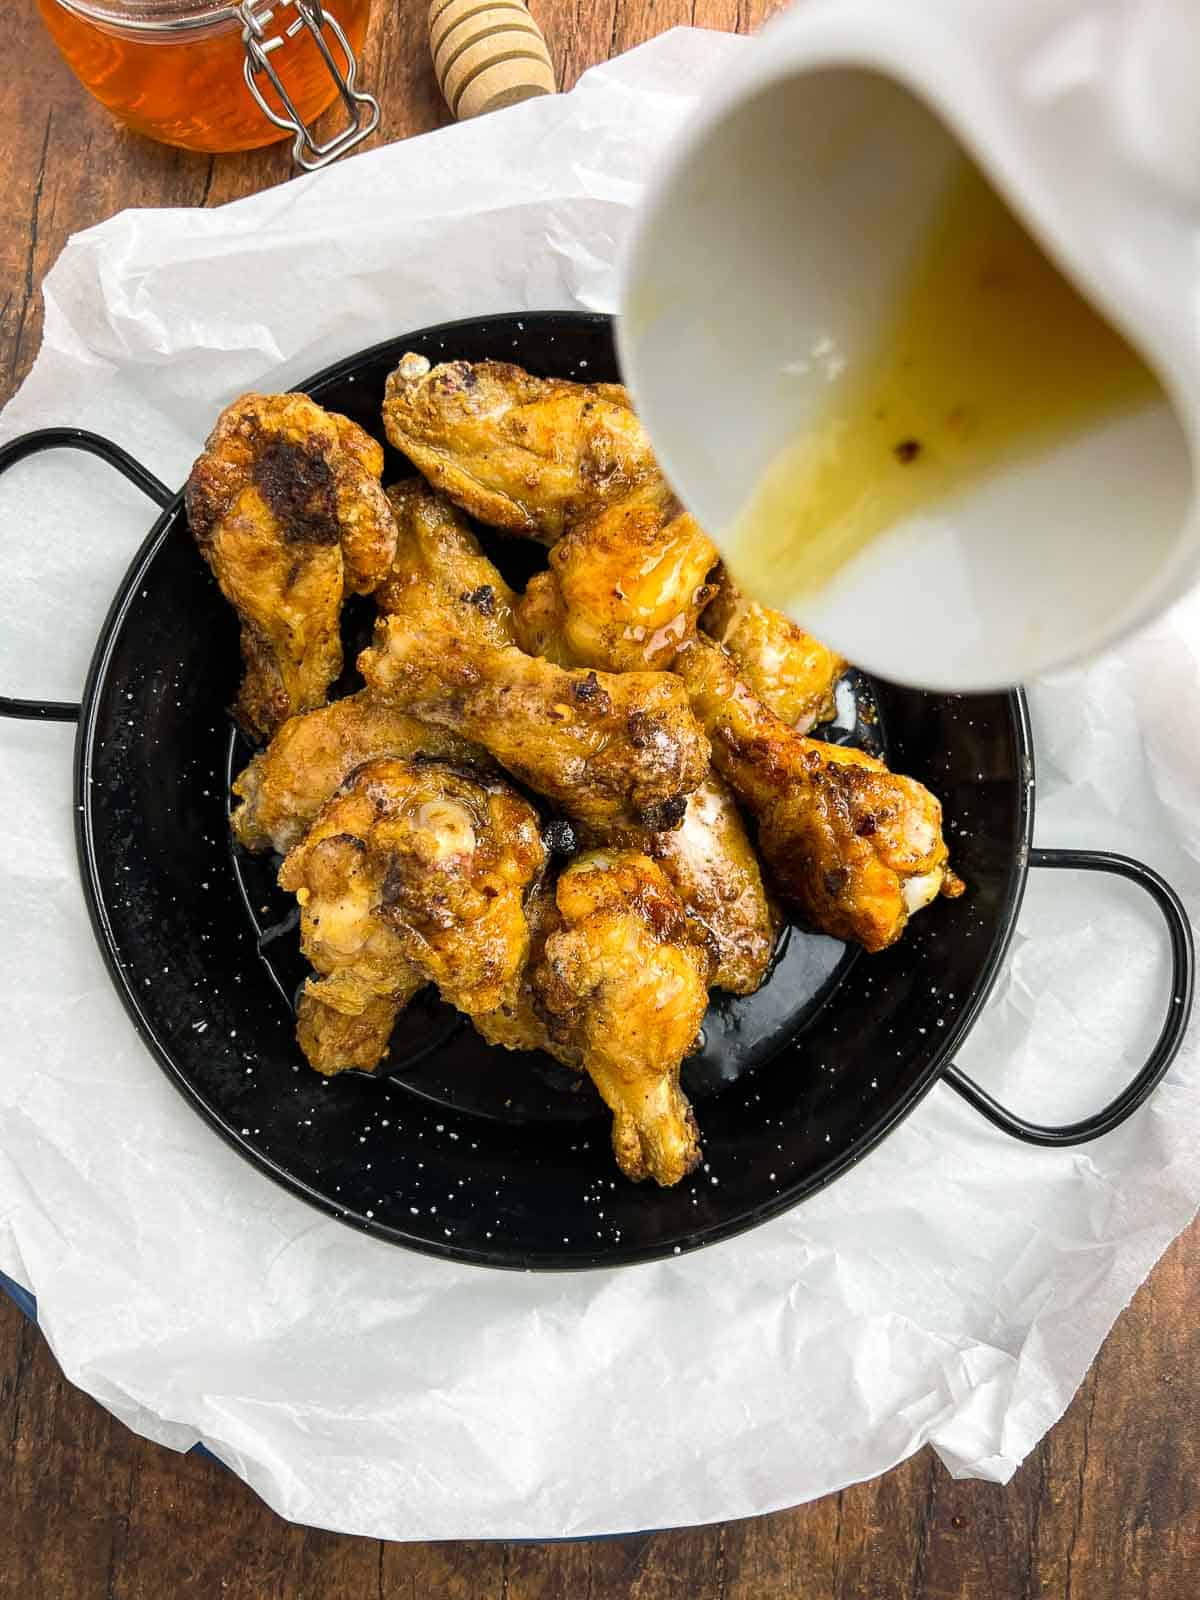 Pouring hot honey on cooked chicken wings.